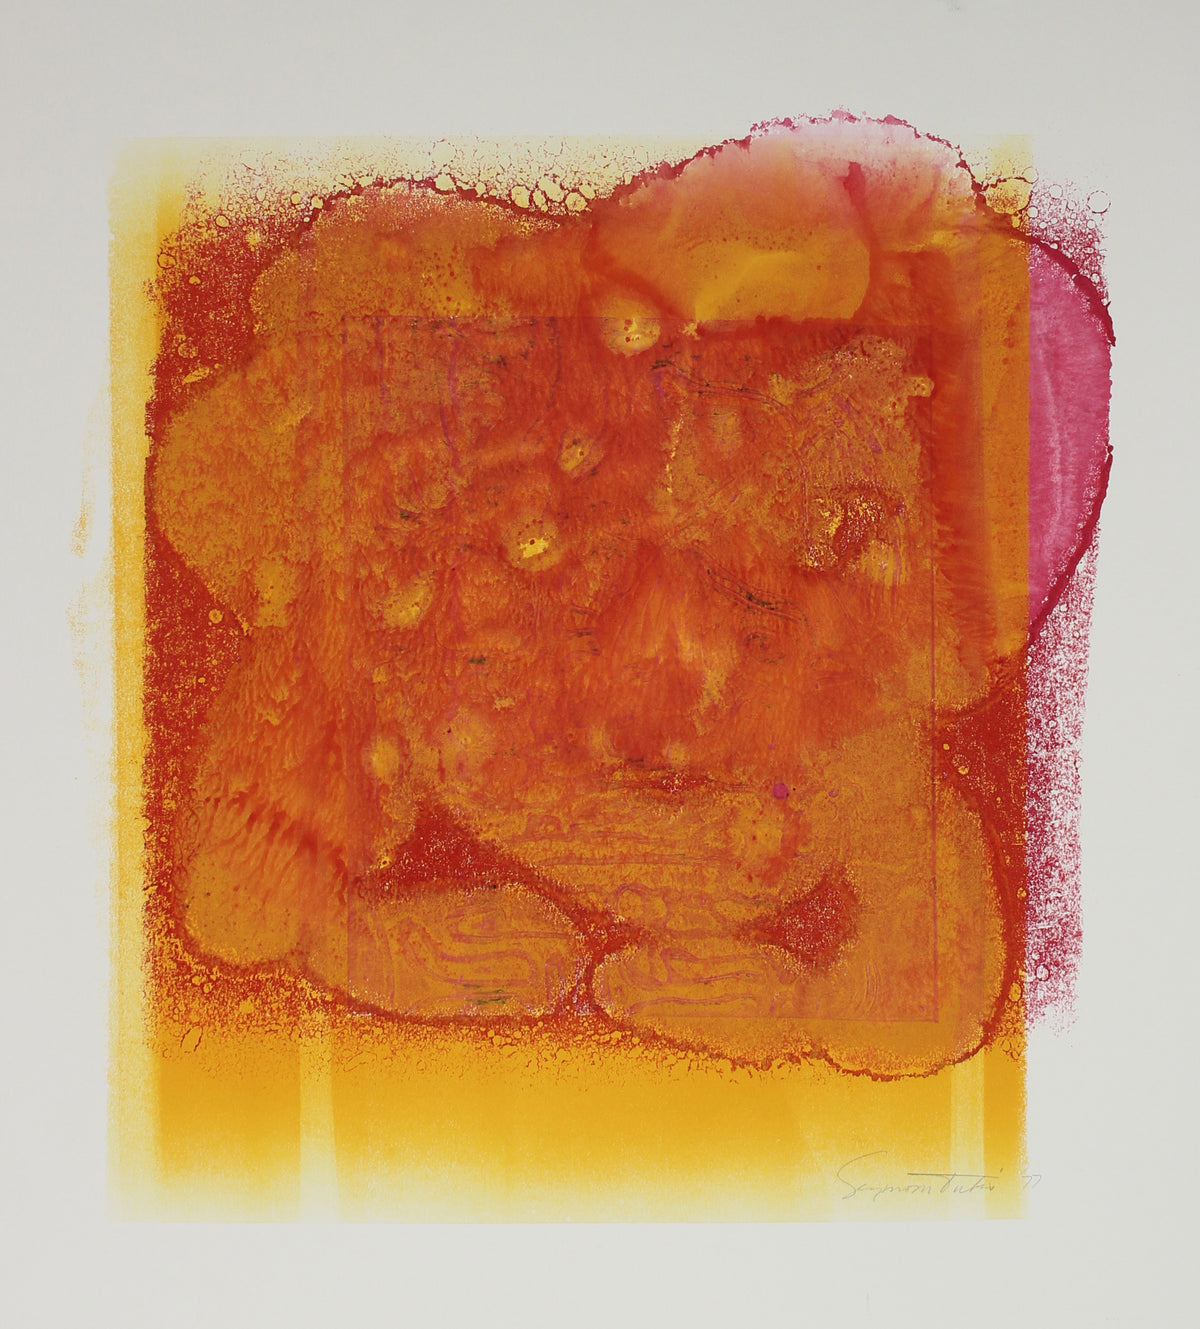 Red &amp; Yellow Rothko-Esque Abstract &lt;br&gt;1977 Monotype on Paper &lt;br&gt;&lt;br&gt;#61740